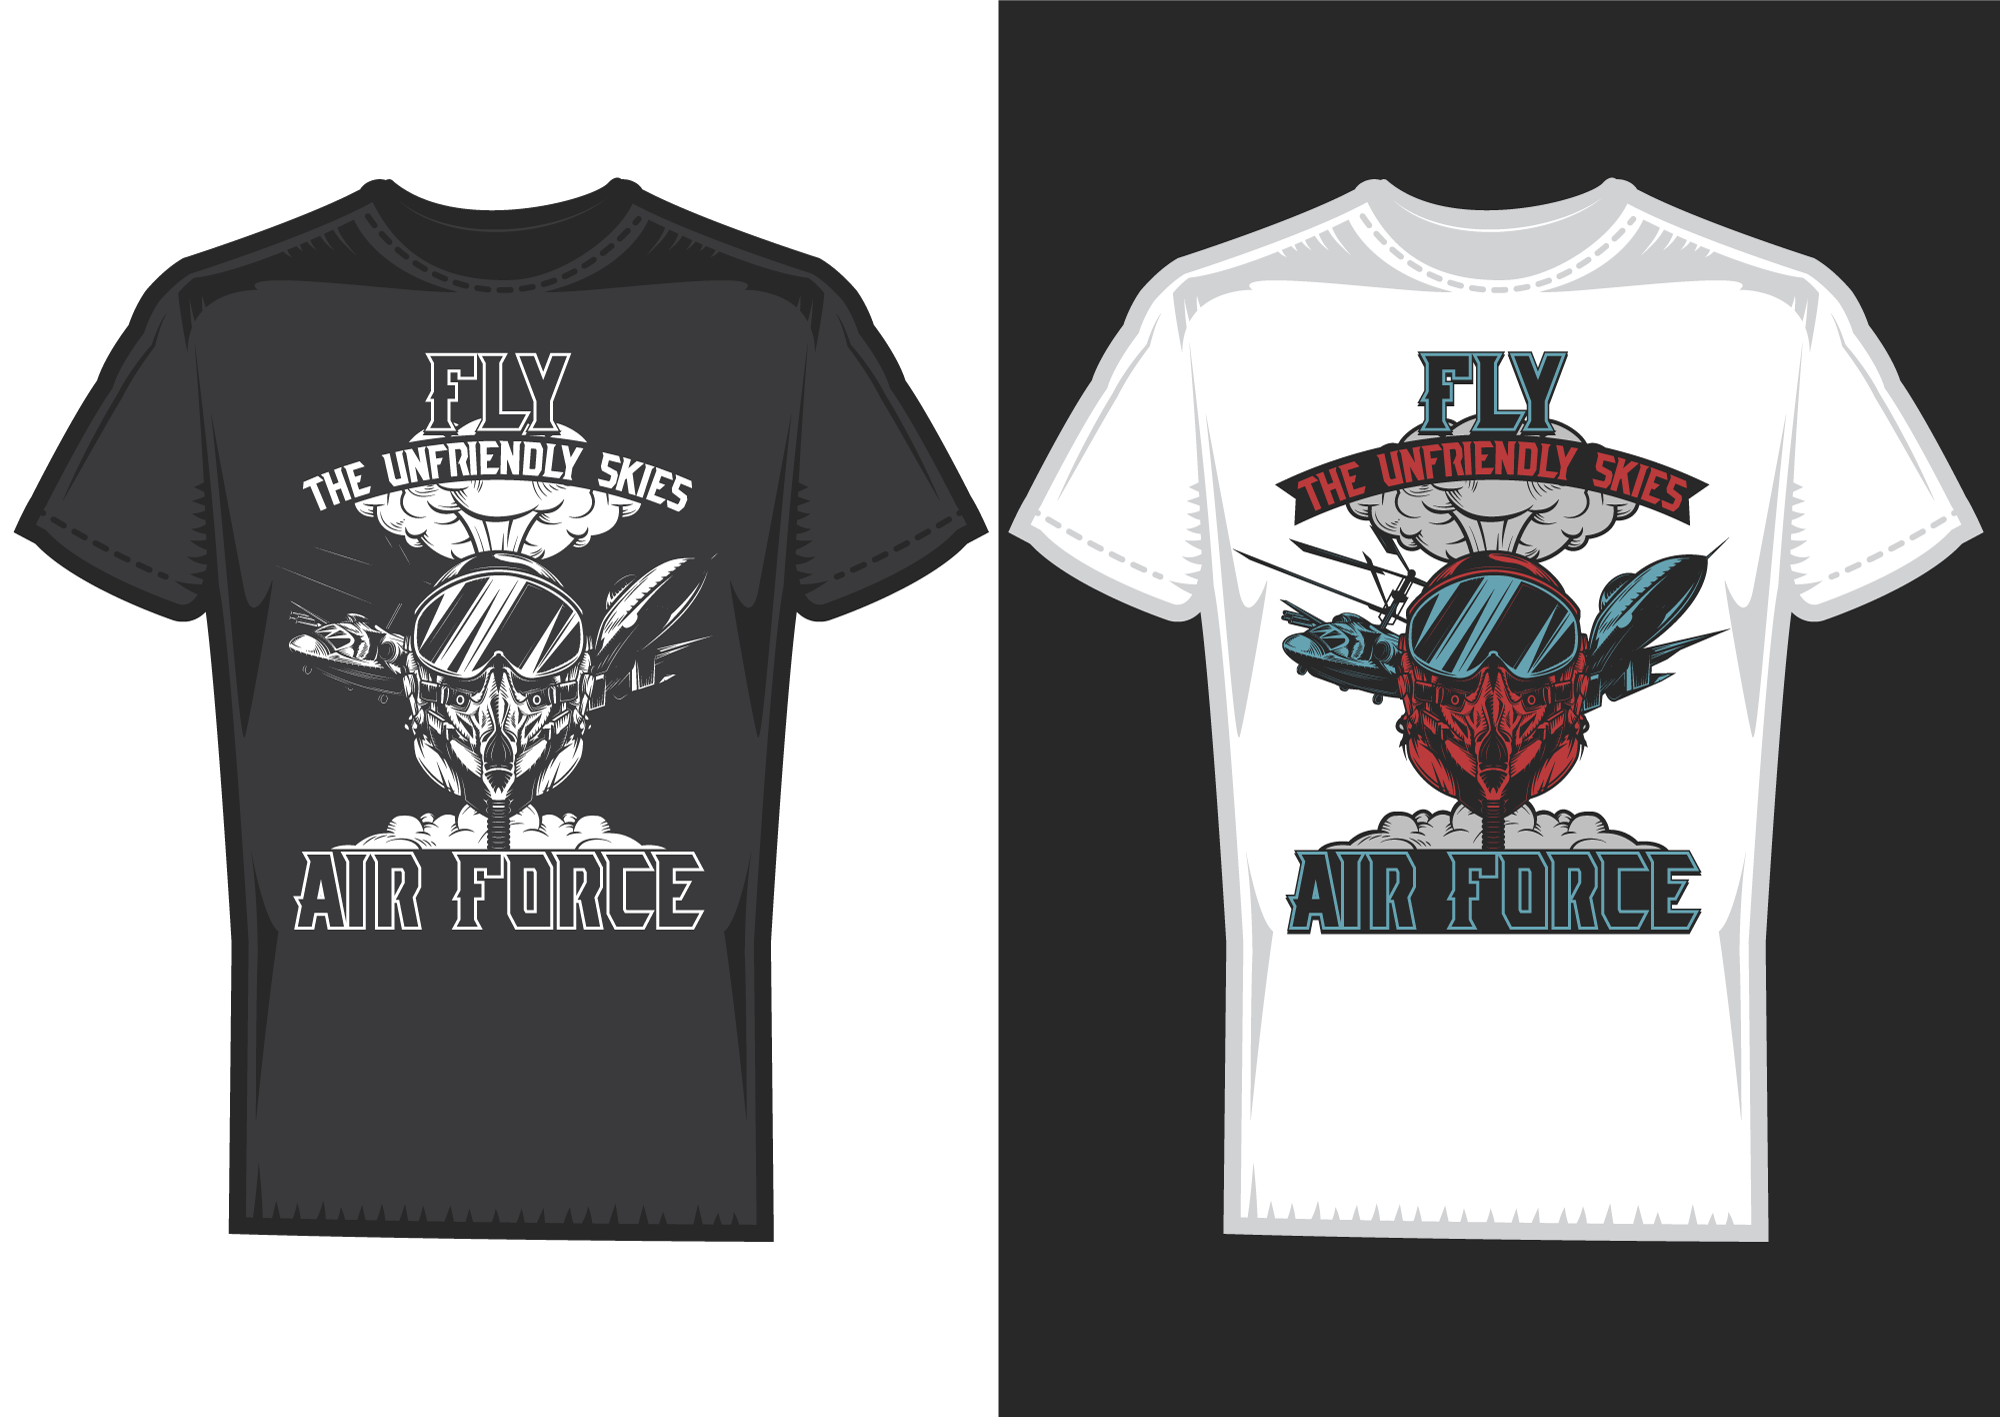 create bulk t shirt design or typography with in 12 hours for $10 ...